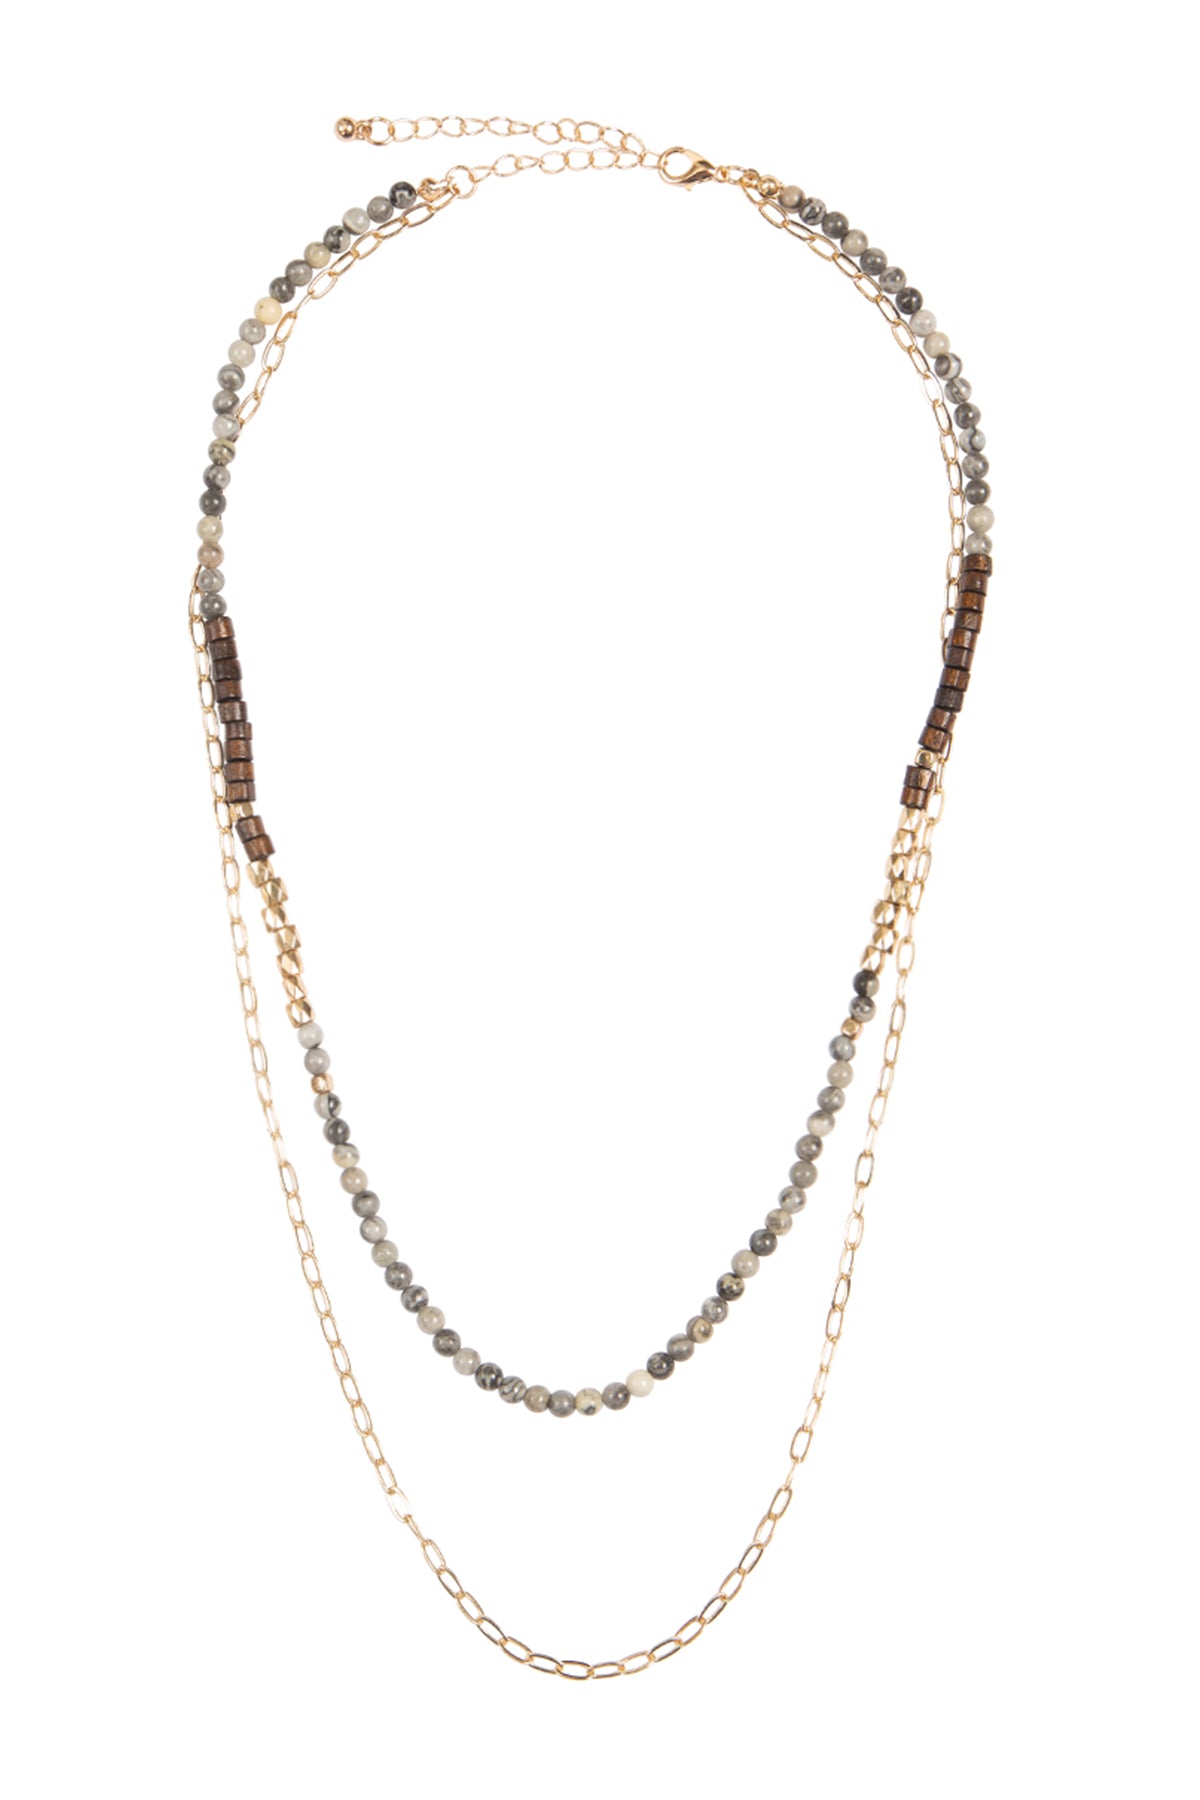 NATURAL STONE, CHAIN LAYERED LONG NECKLACE